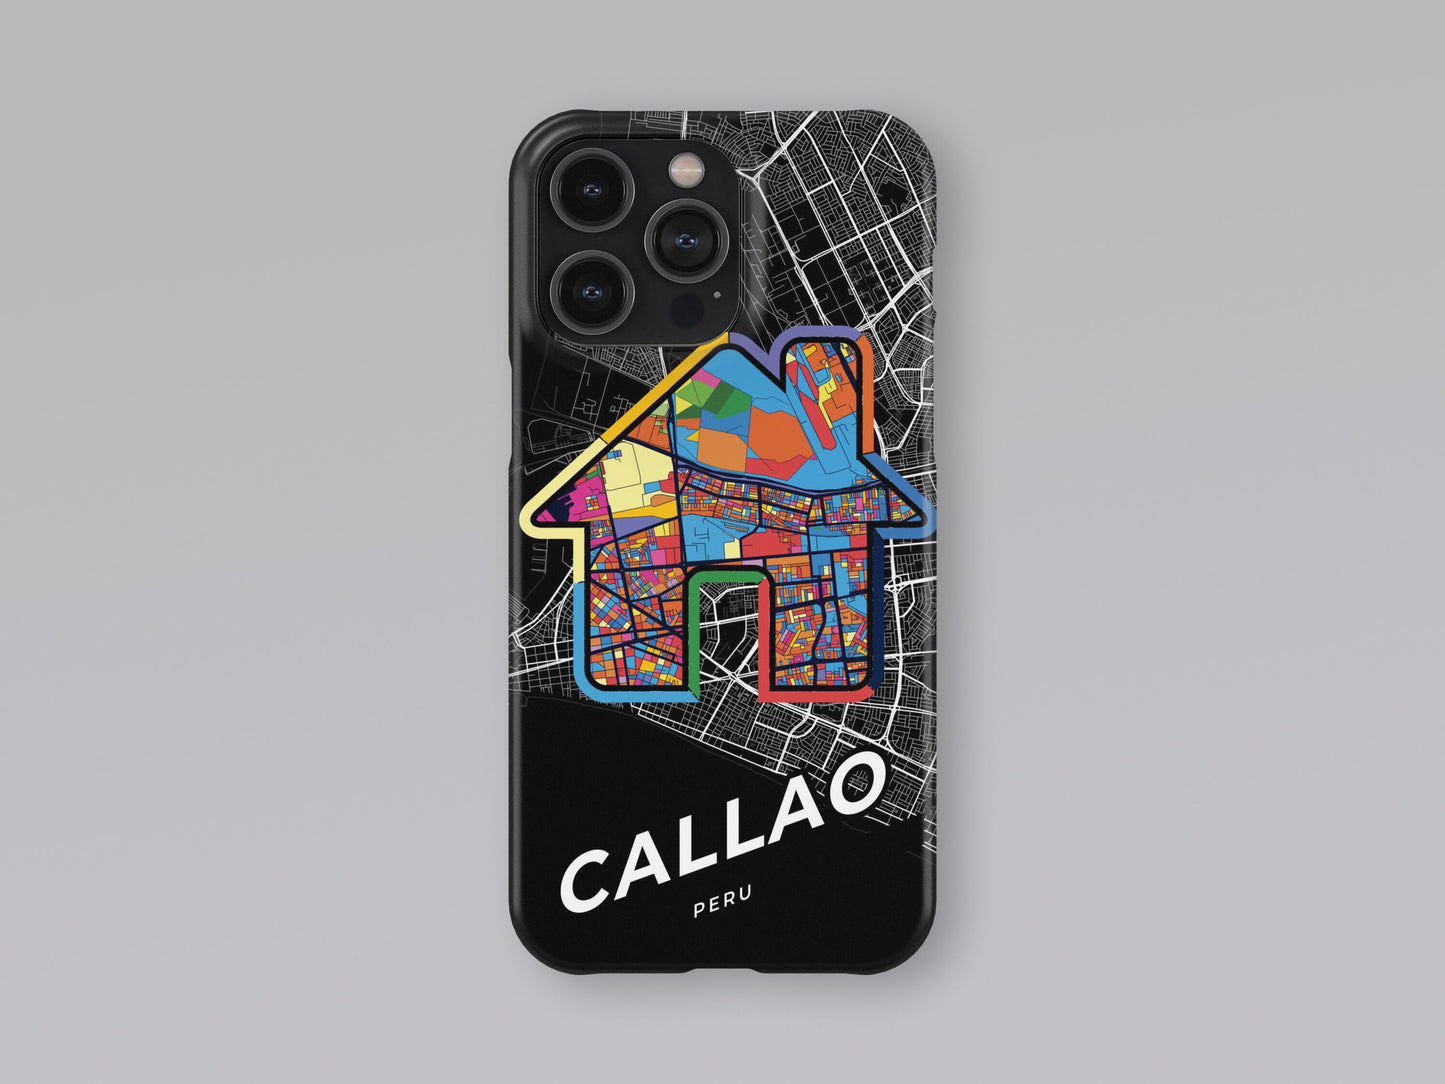 Callao Peru slim phone case with colorful icon. Birthday, wedding or housewarming gift. Couple match cases. 3